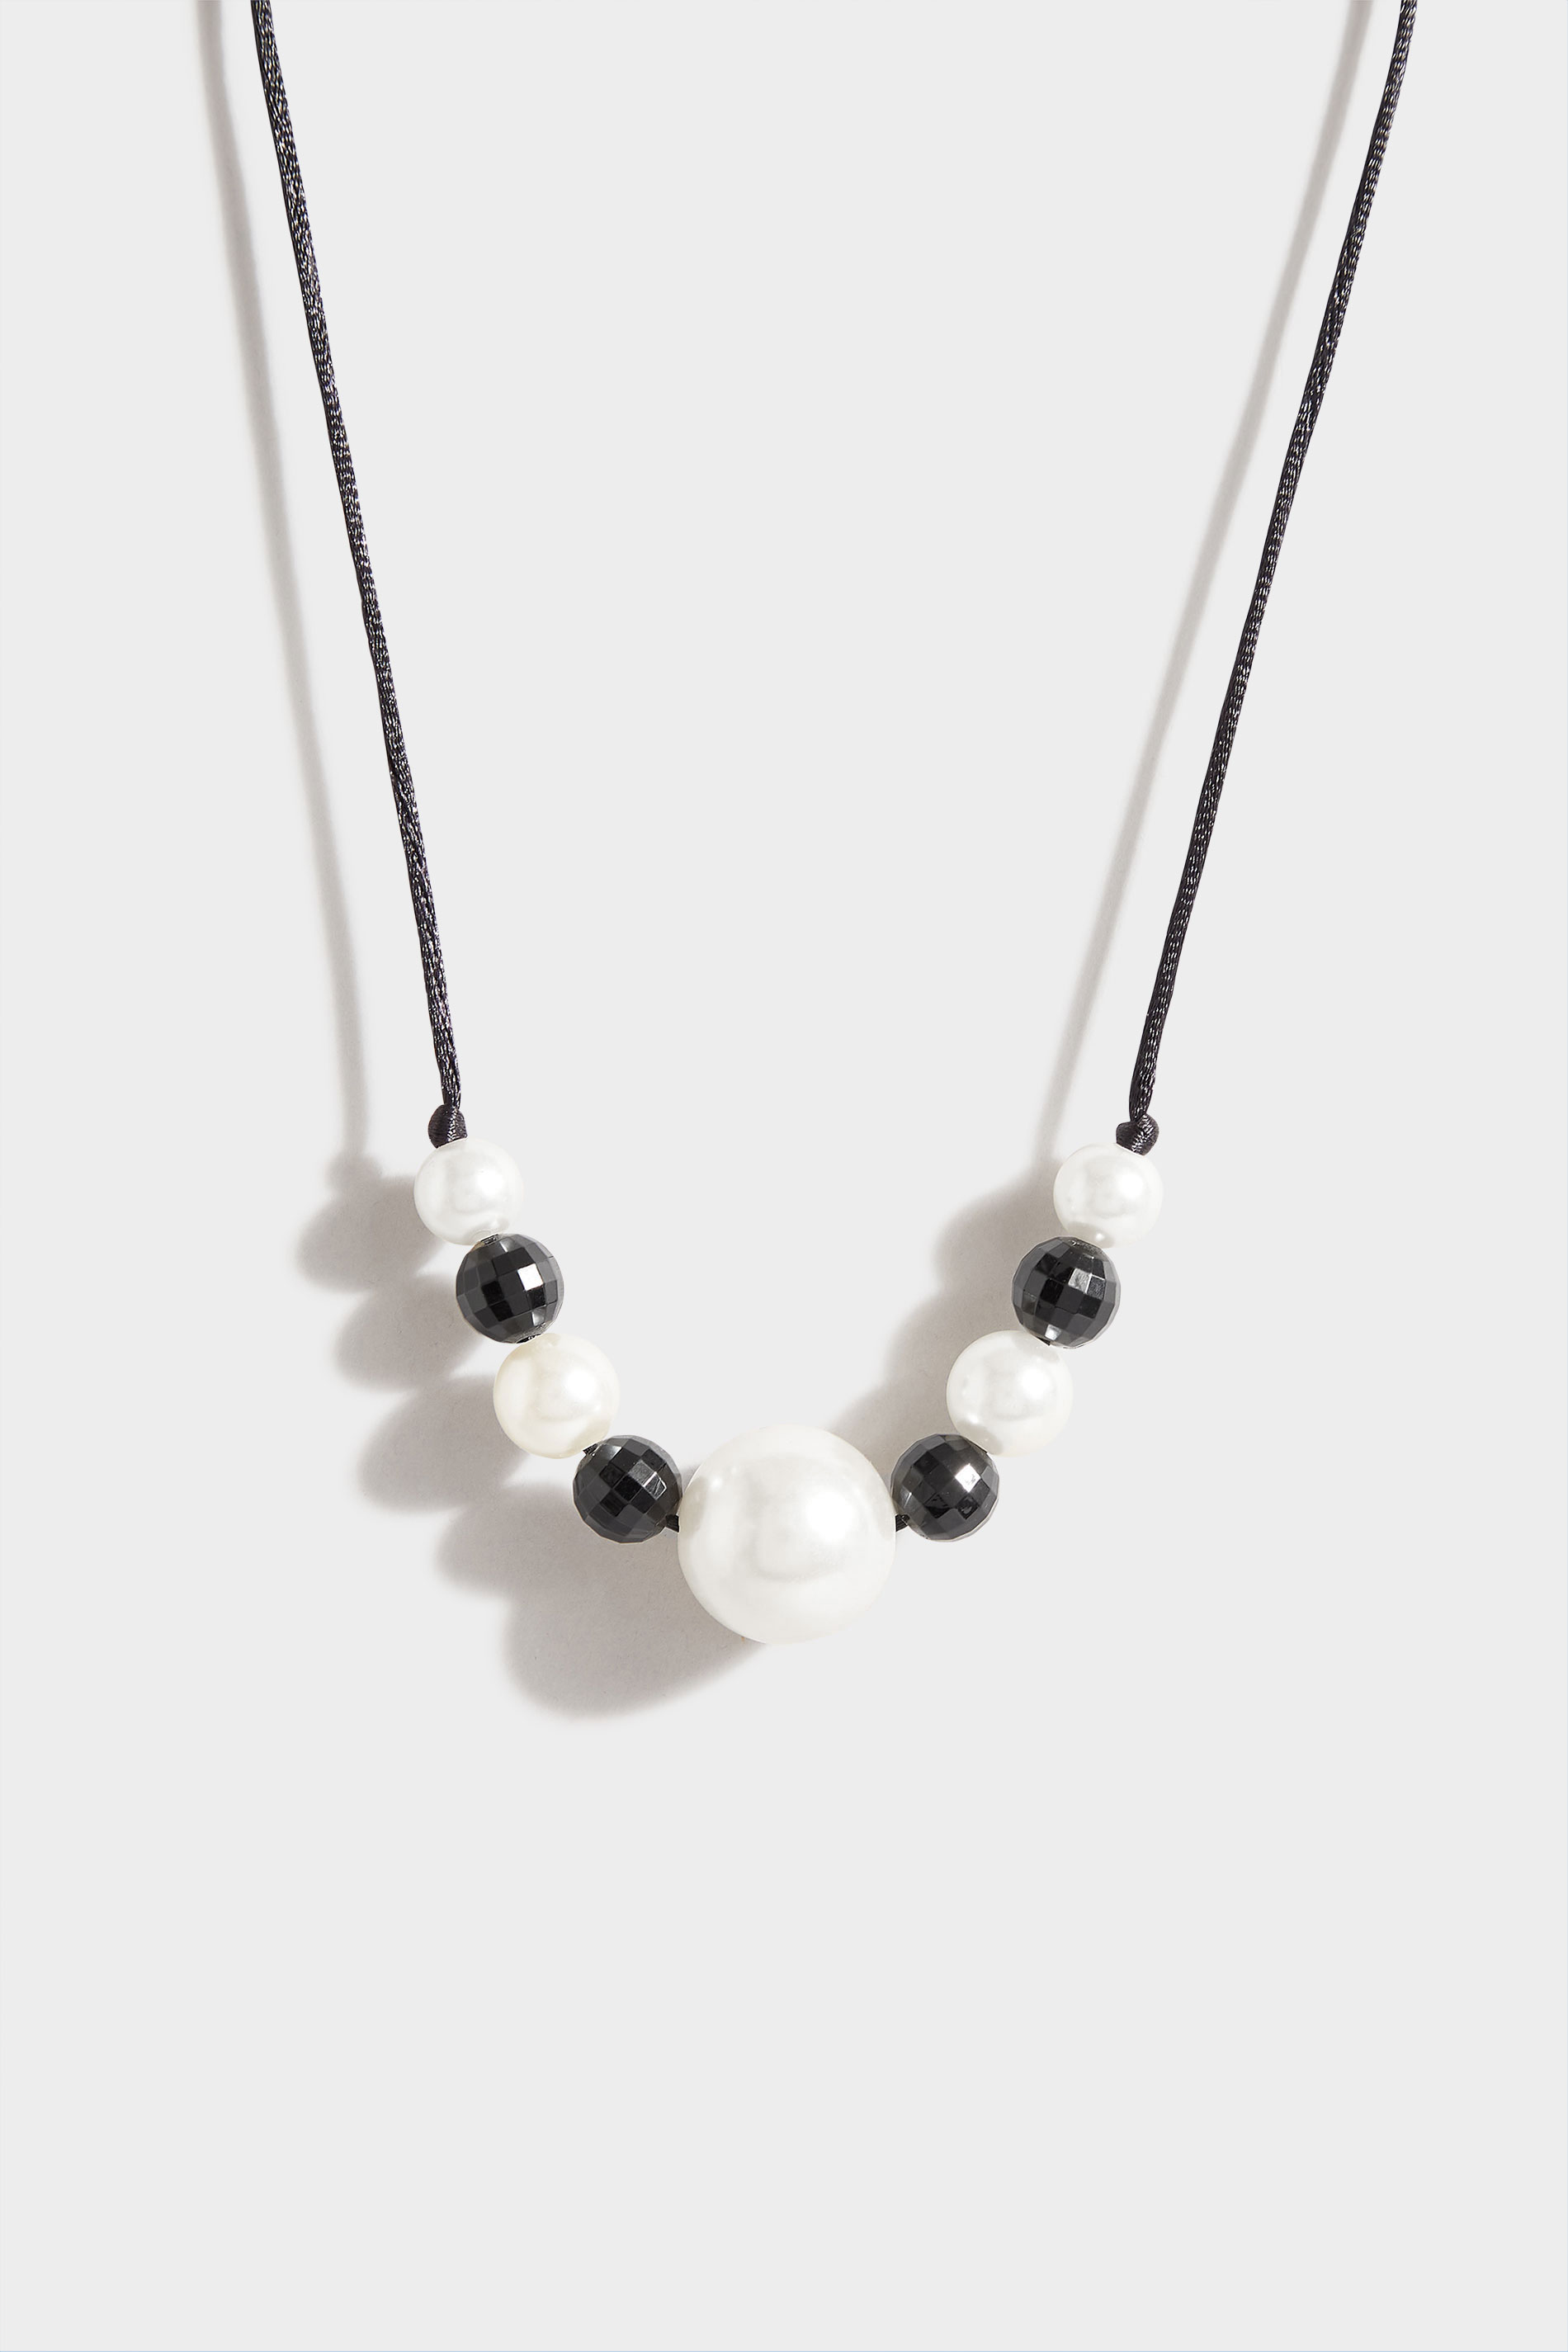 Black and White Beaded Necklace_F.jpg